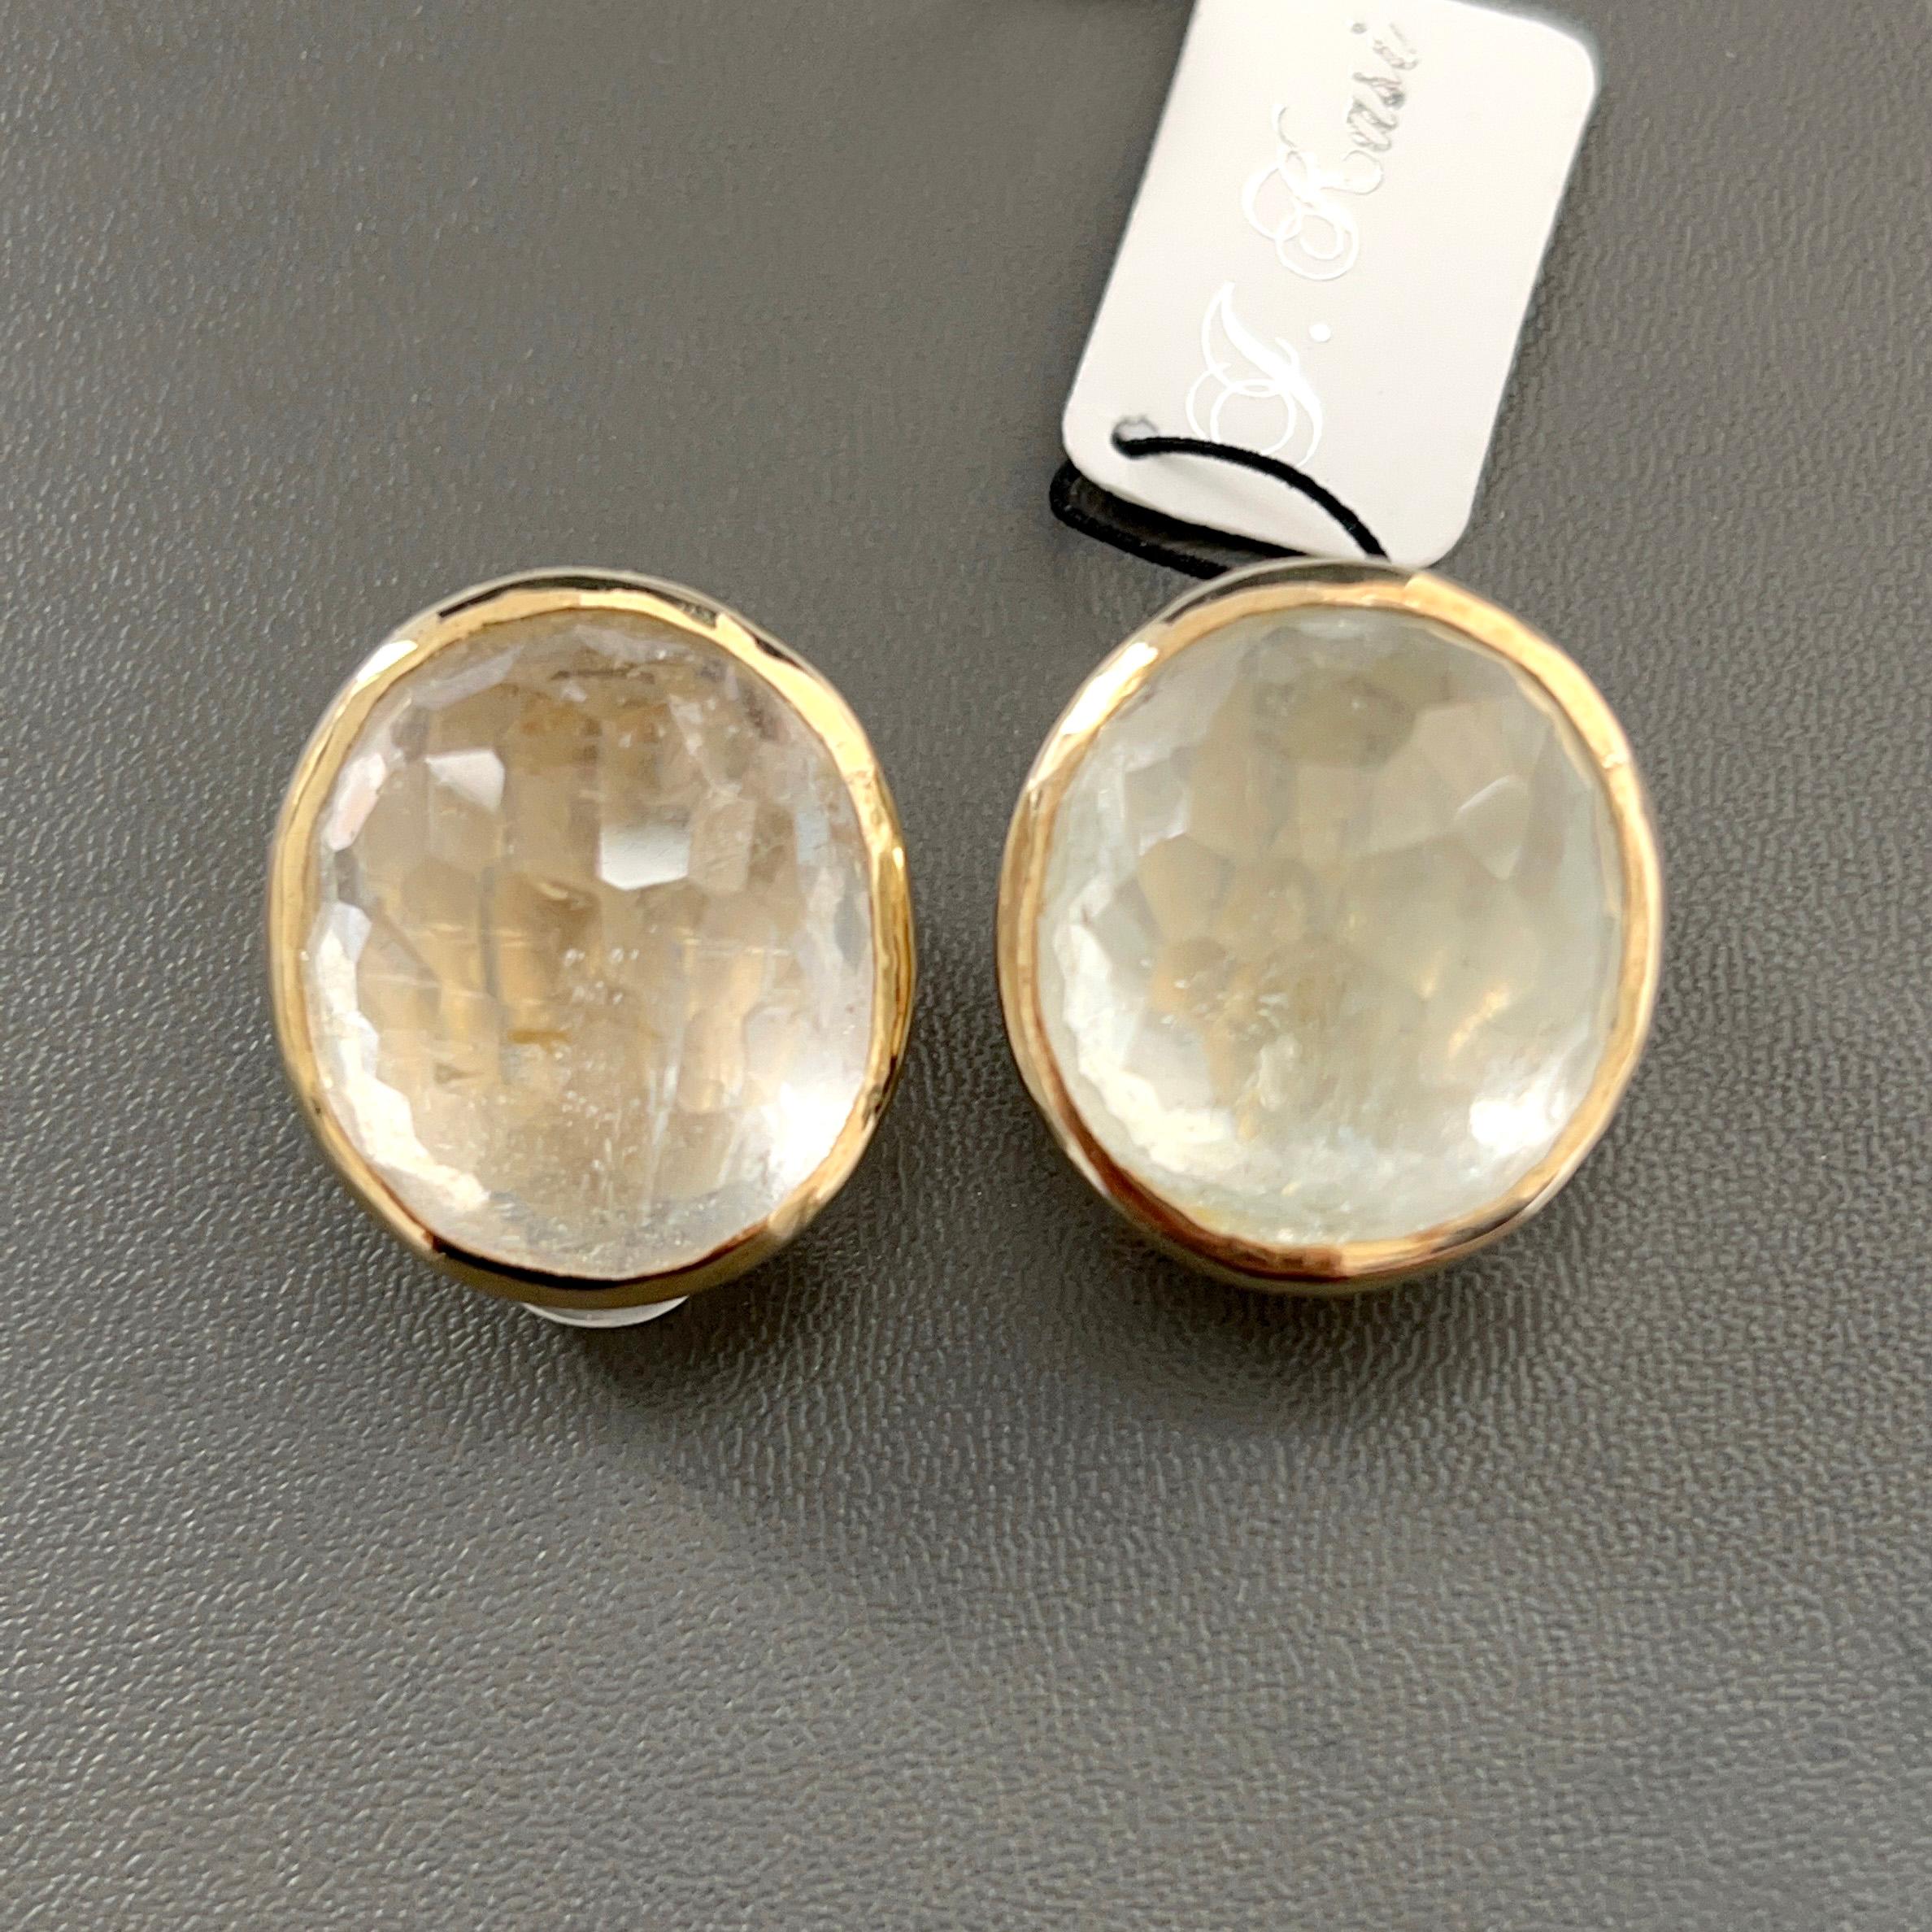 The stunning earrings feature a pair of large 85 carat multi-facet dome-shape genuine white topaz, hand bezel-set in 18k gold vermeil over sterling silver. Large and comfortable clip backing with rubber jacket for additional support allowing the